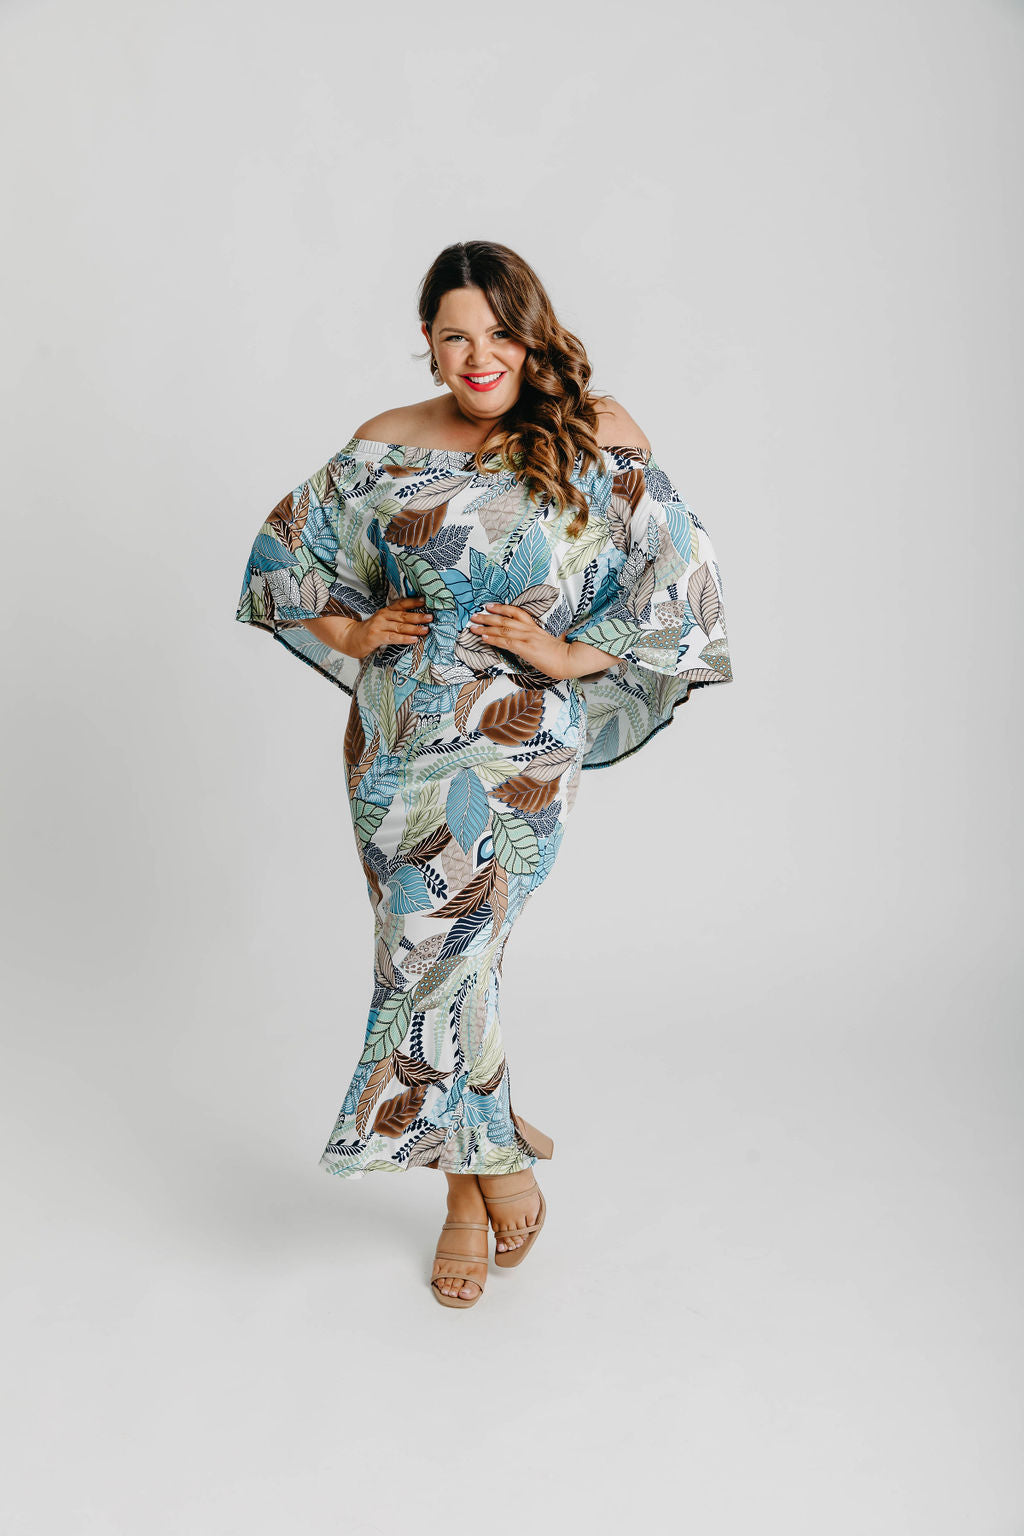 OVER 70% OFF No Shade Here Dress Long - Wild Leaf